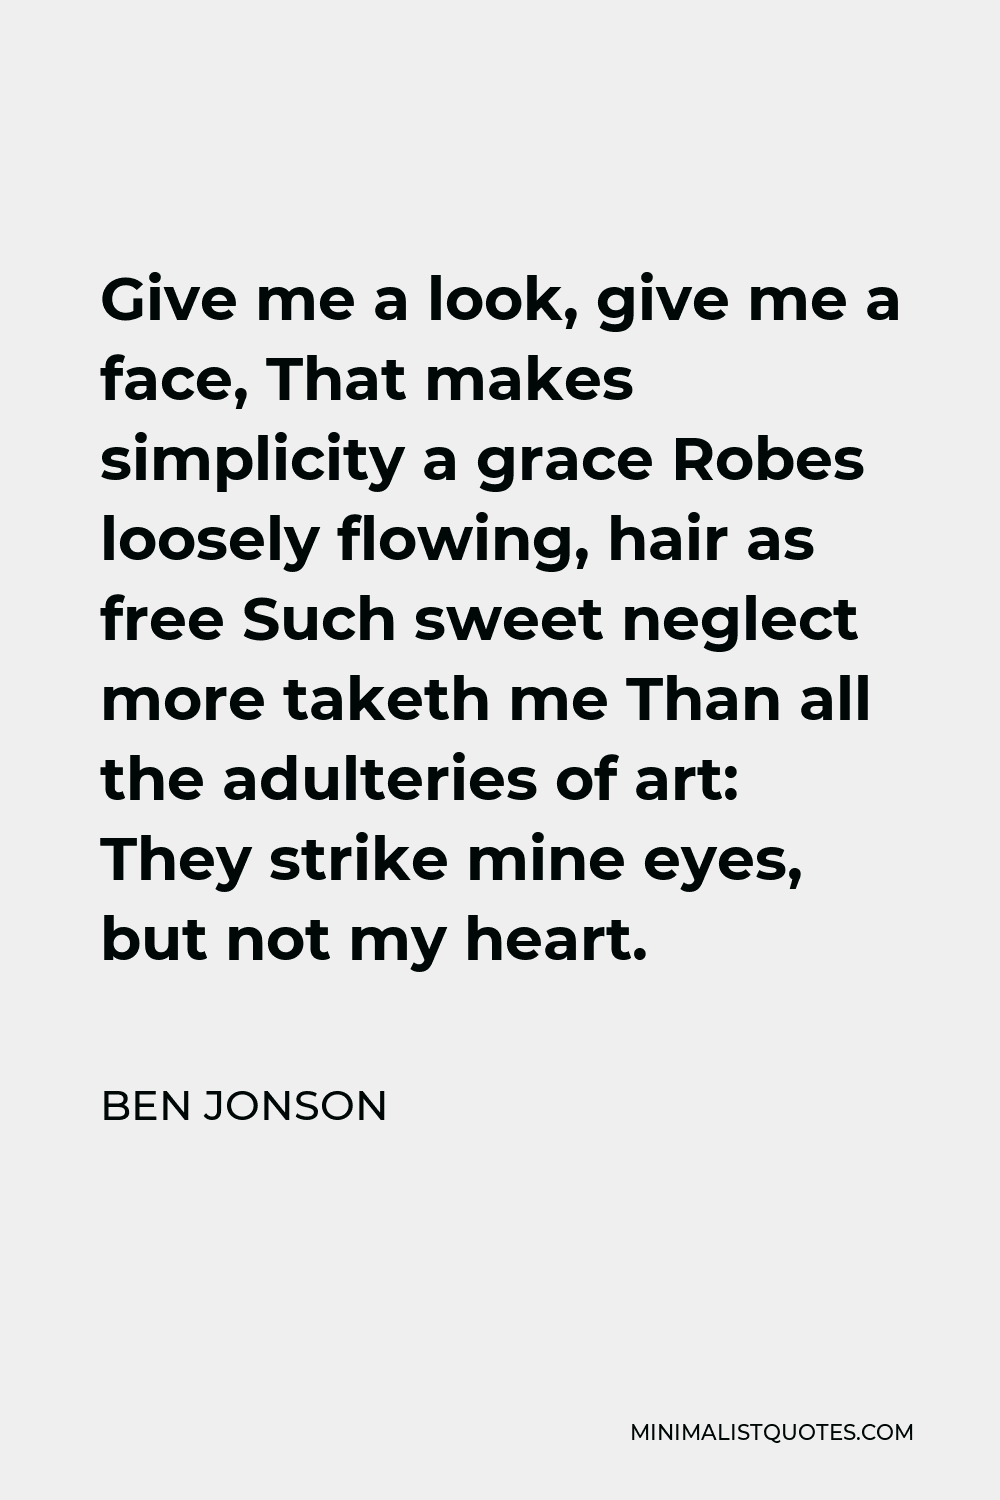 Ben Jonson Quote - Give me a look, give me a face, That makes simplicity a grace Robes loosely flowing, hair as free Such sweet neglect more taketh me Than all the adulteries of art: They strike mine eyes, but not my heart.